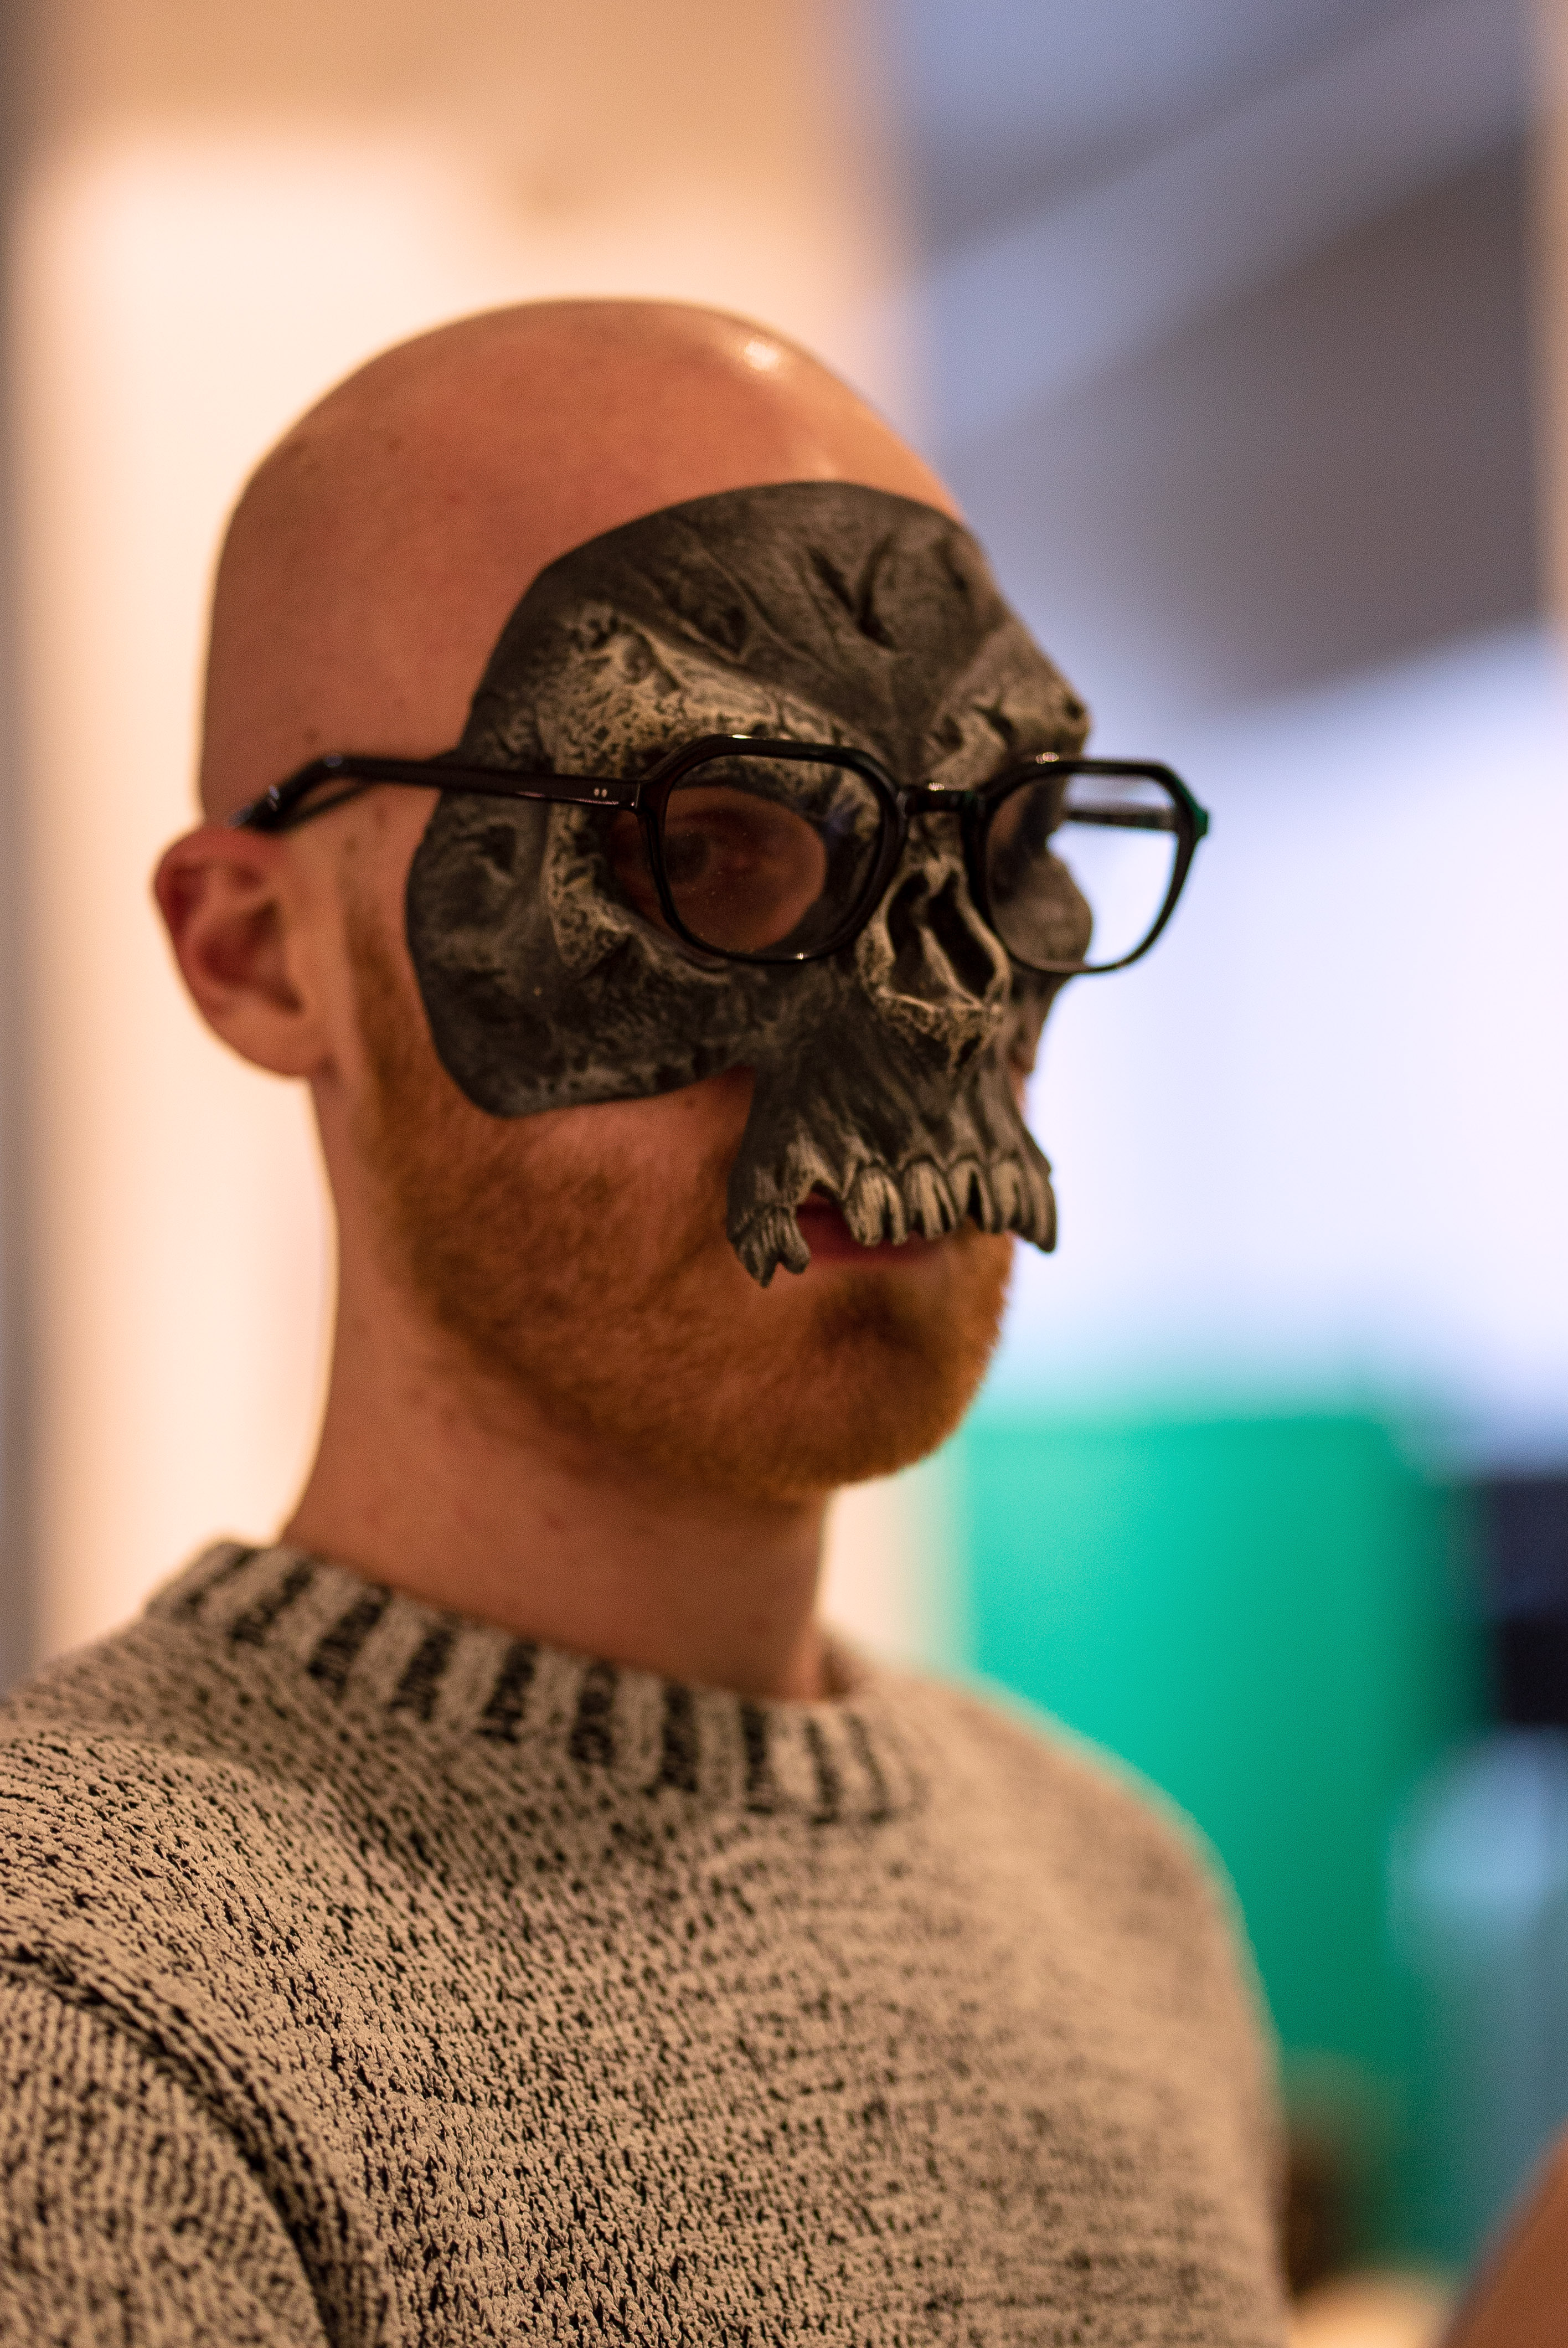 The photo is a close up shot of a person wearing a skull mask. On top of the skull mask they wear their glasses.